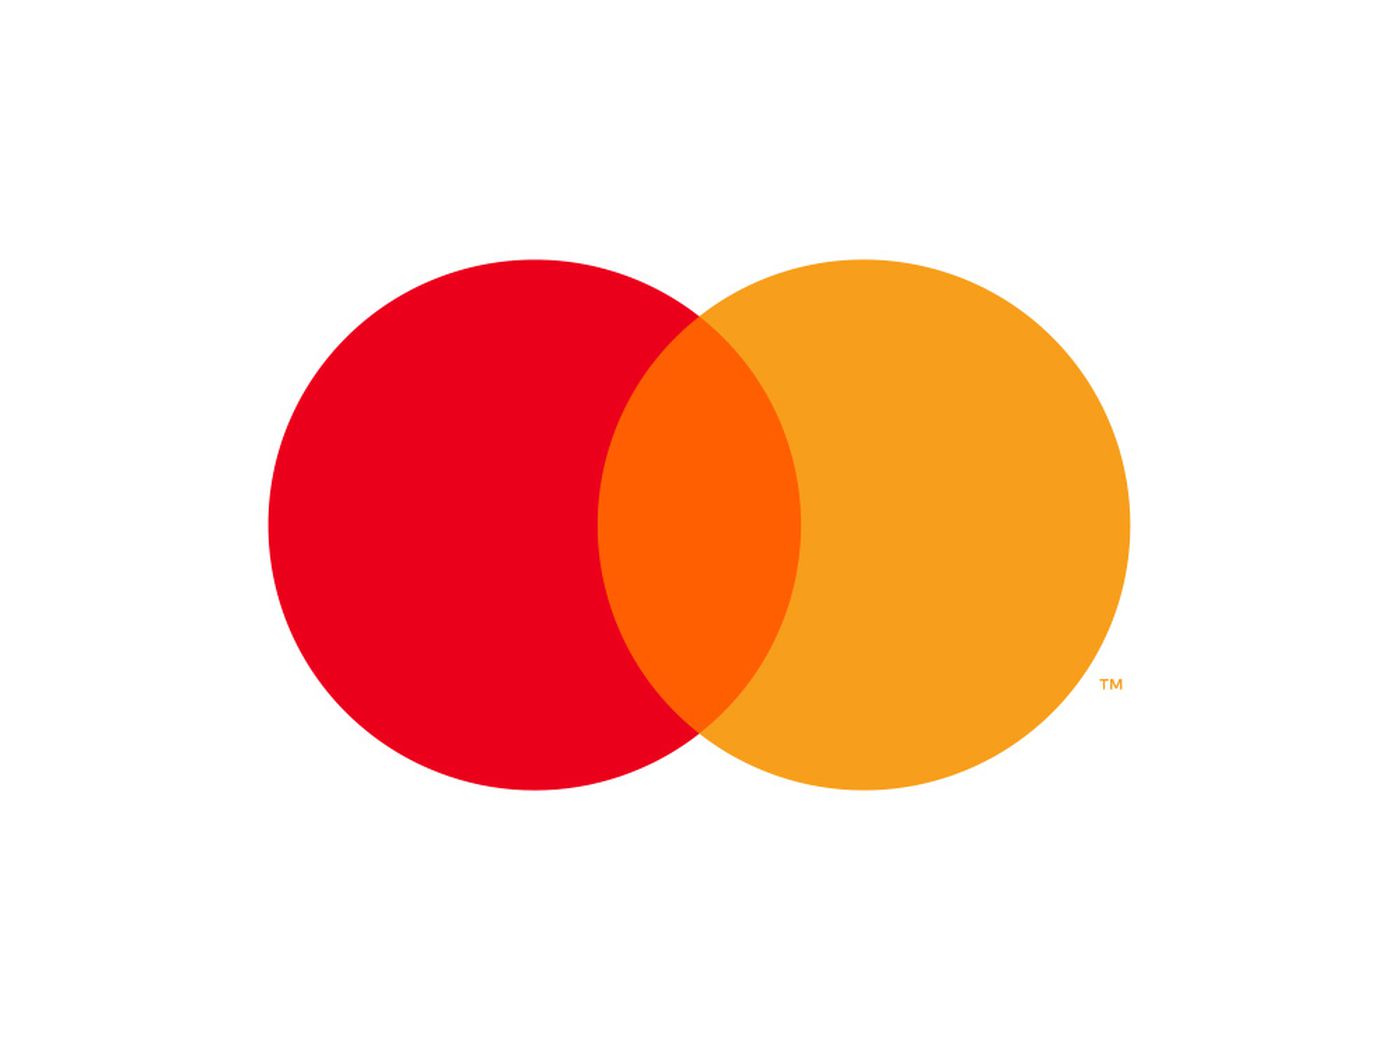 Mastercard Launches Central Bank Digital Currencies (CBDCs) Testing Platform, Enabling Central Banks to Assess and Explore National Digital Currencies